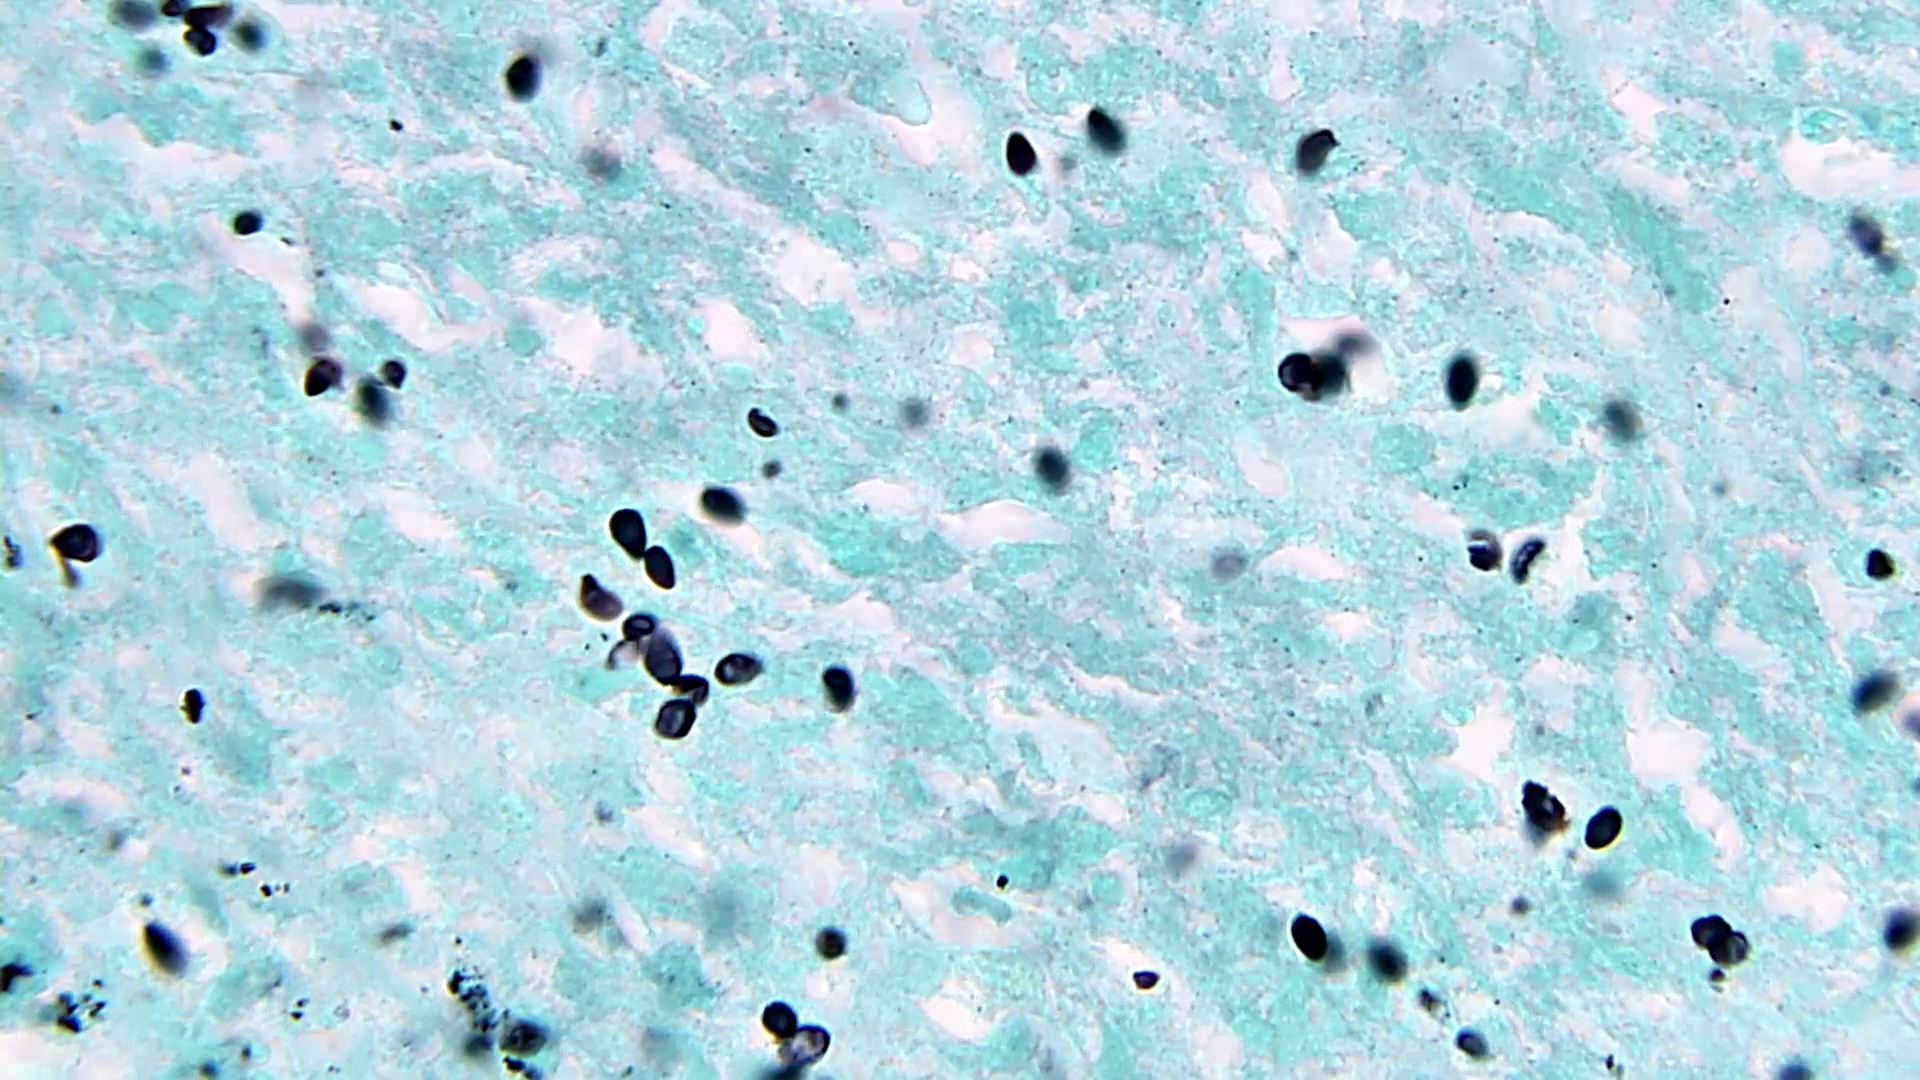 GMS small uniform single and clustered yeasts